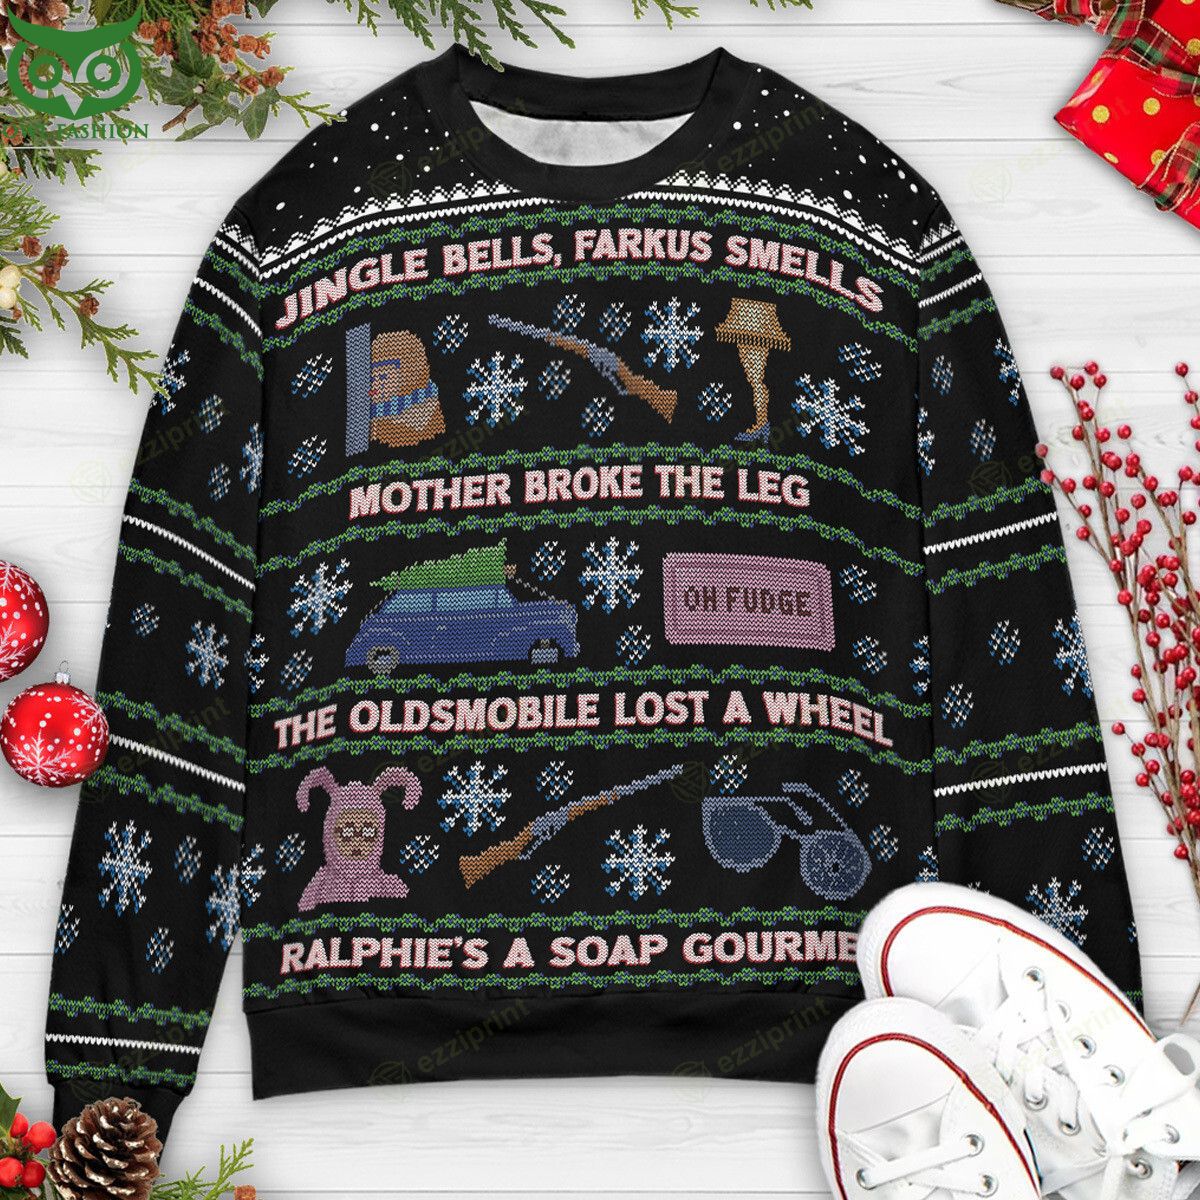 Jinger Bells Farkus smells A Christmas Story Sweater Best couple on earth